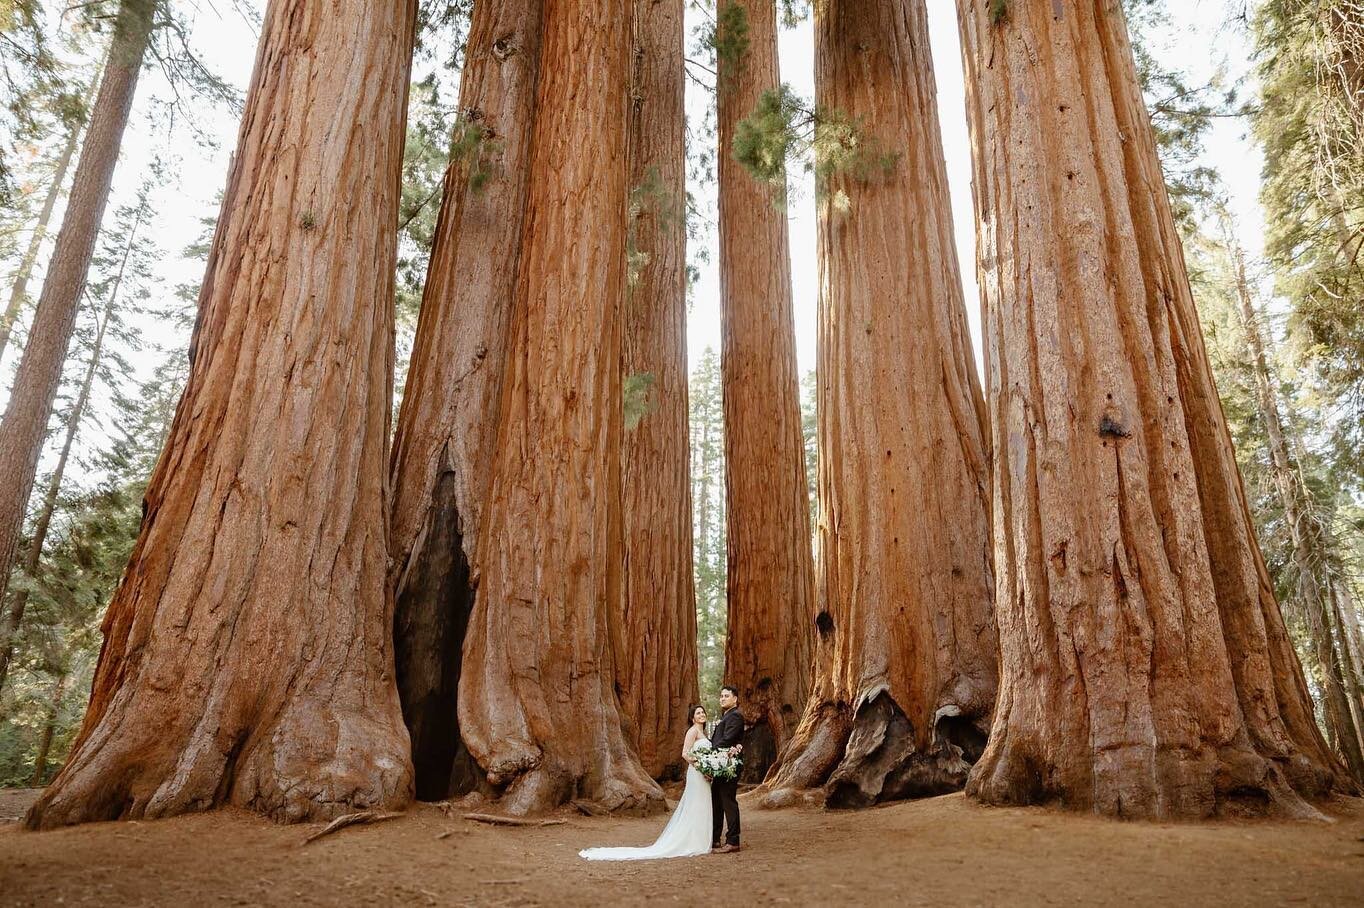 I had the honor of capturing my dear friends get married in the place where it all began&hellip;still feeling all the butterflies!🌲